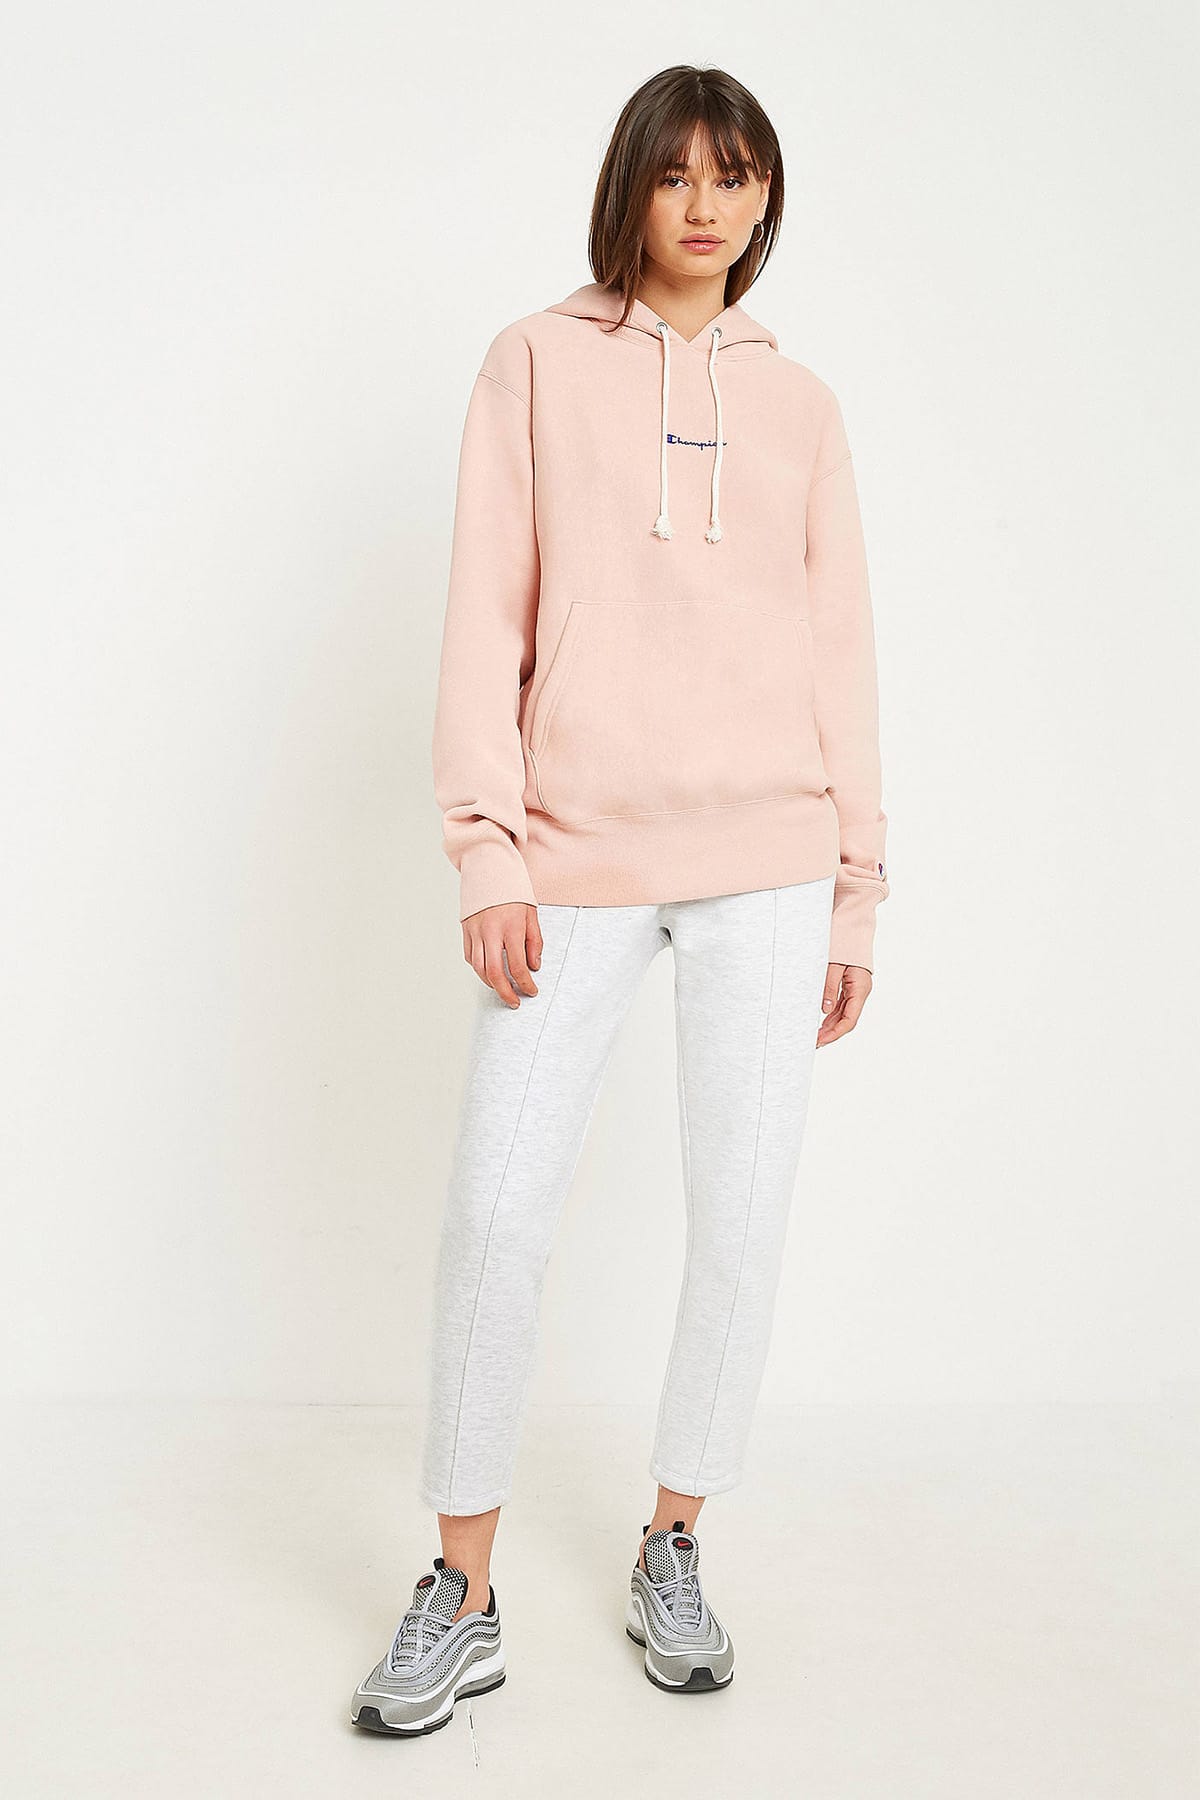 Champion Urban Outfitters Dusty Rose 